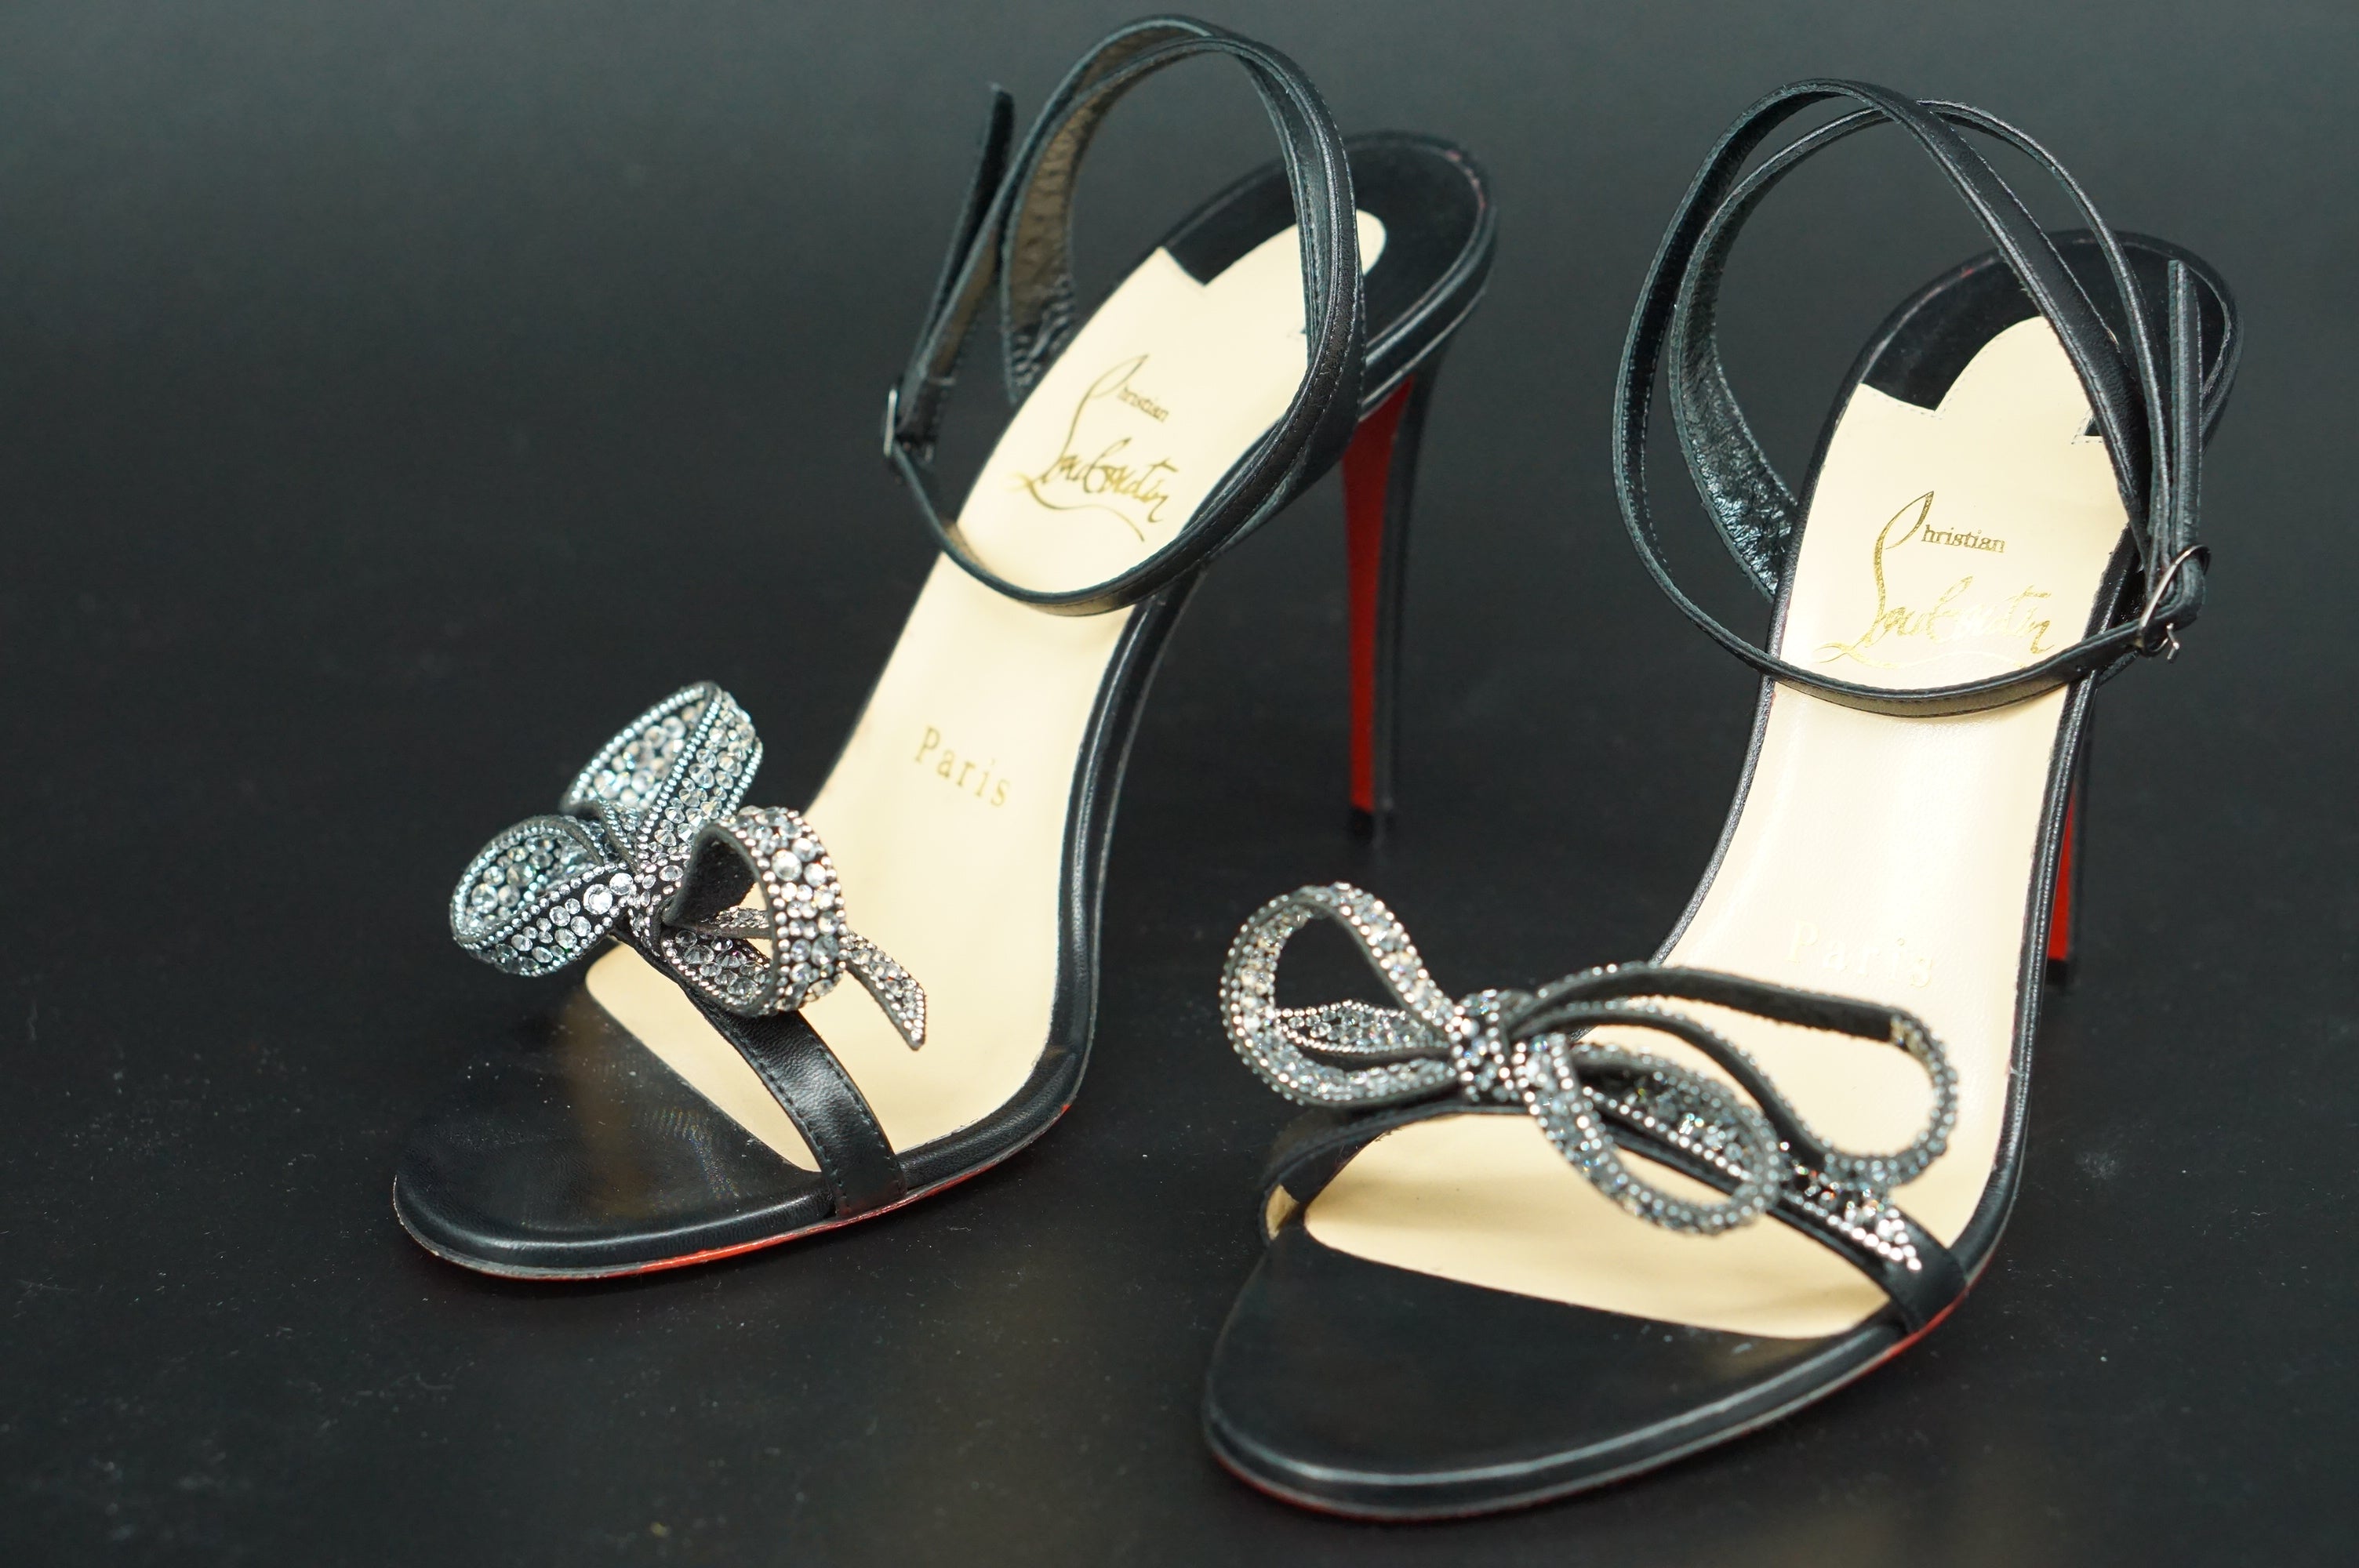 Christian Louboutin Jewel Queen 100 crystal bow leather Sandals SZ 36.5 $1095